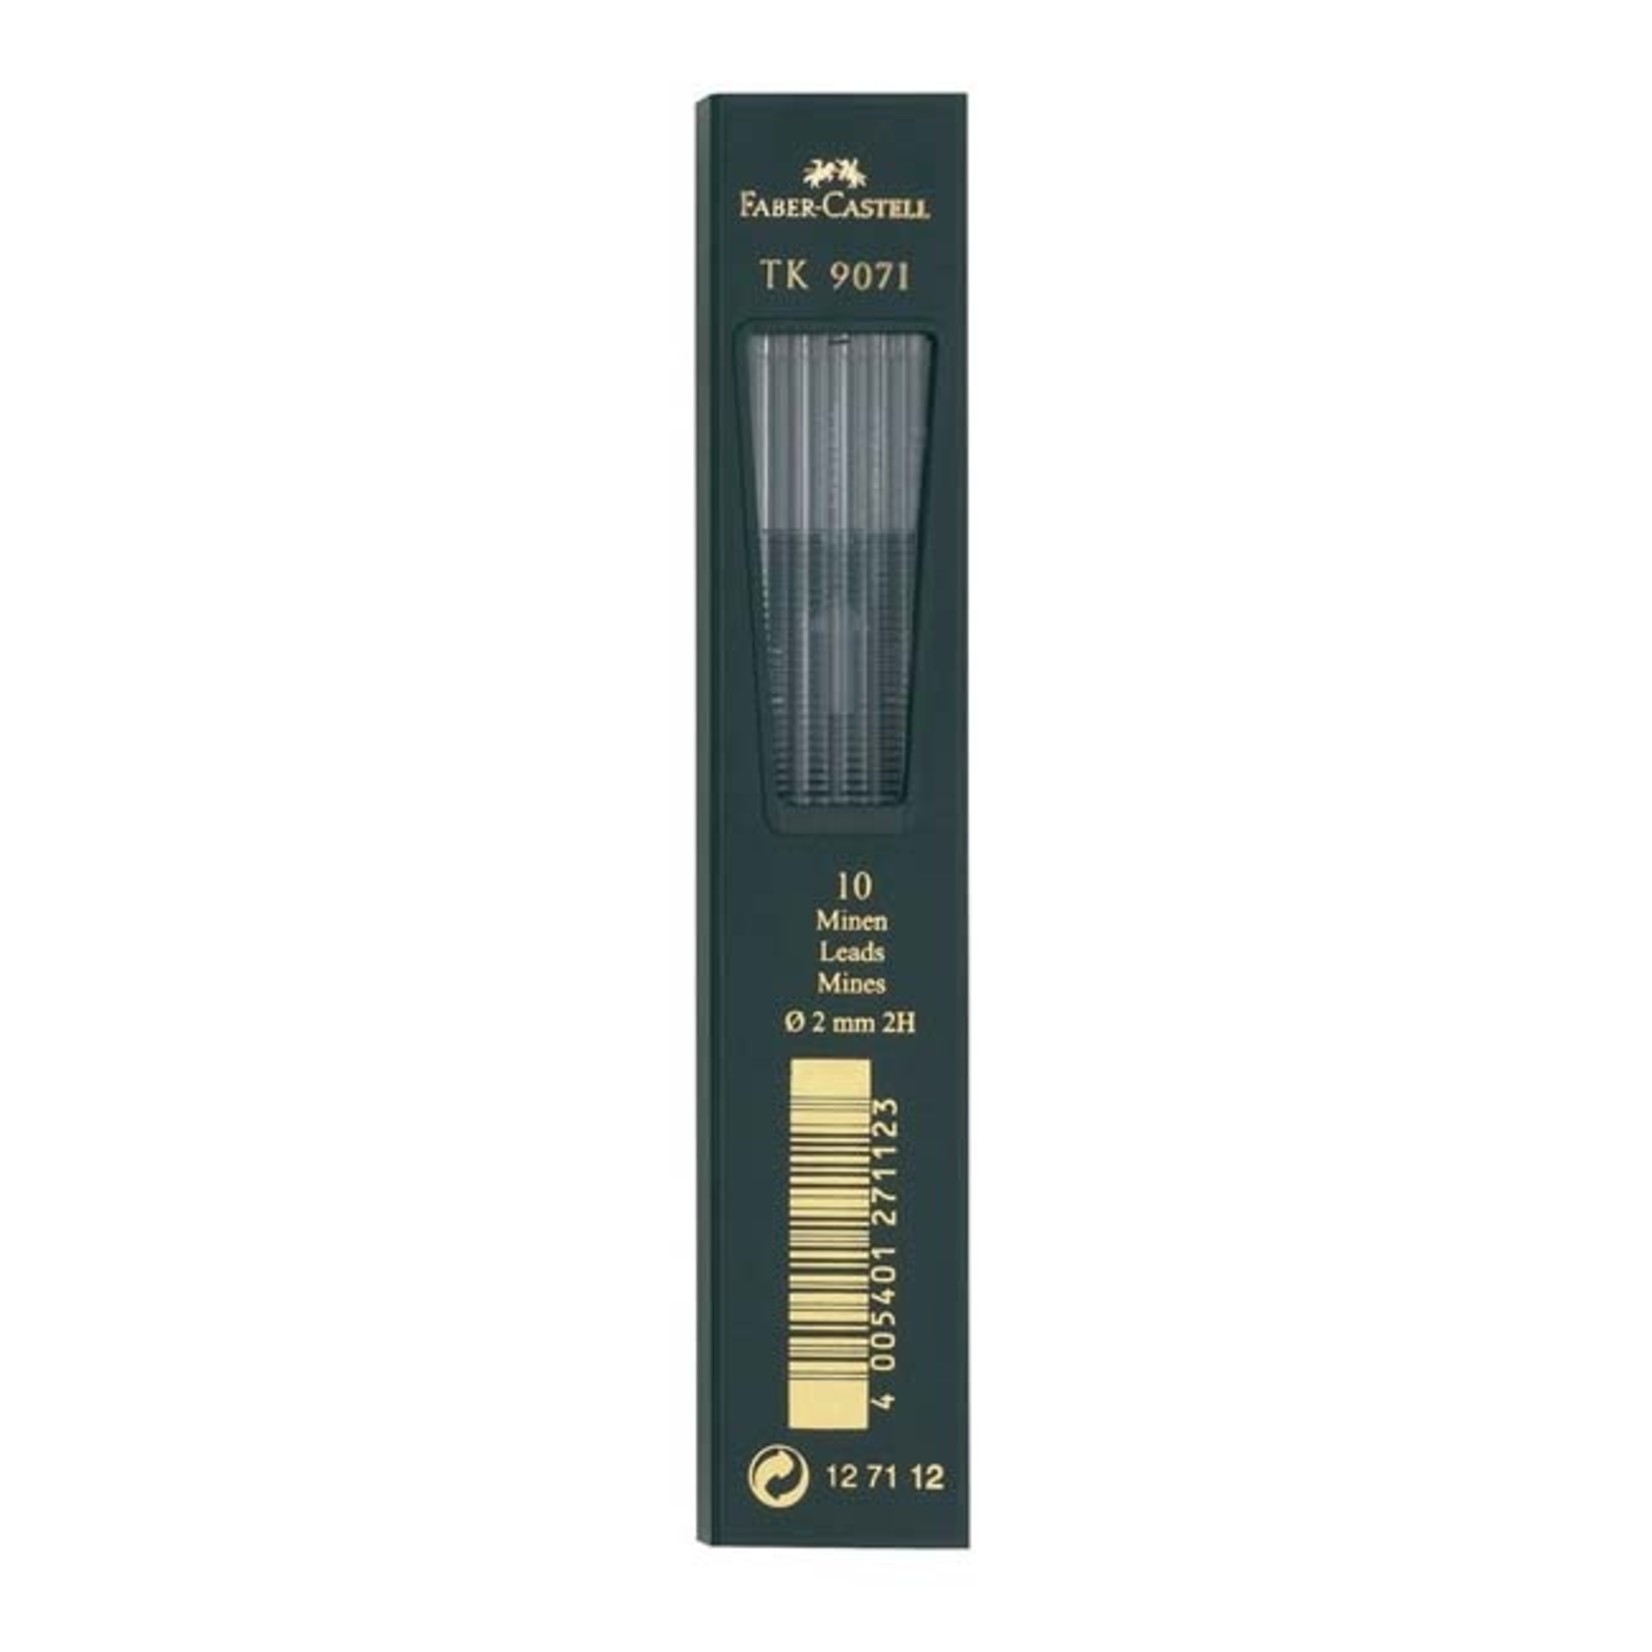 FABER CASTELL FABER CASTELL TK 9071 LEADS 2MM 2H 10/PK